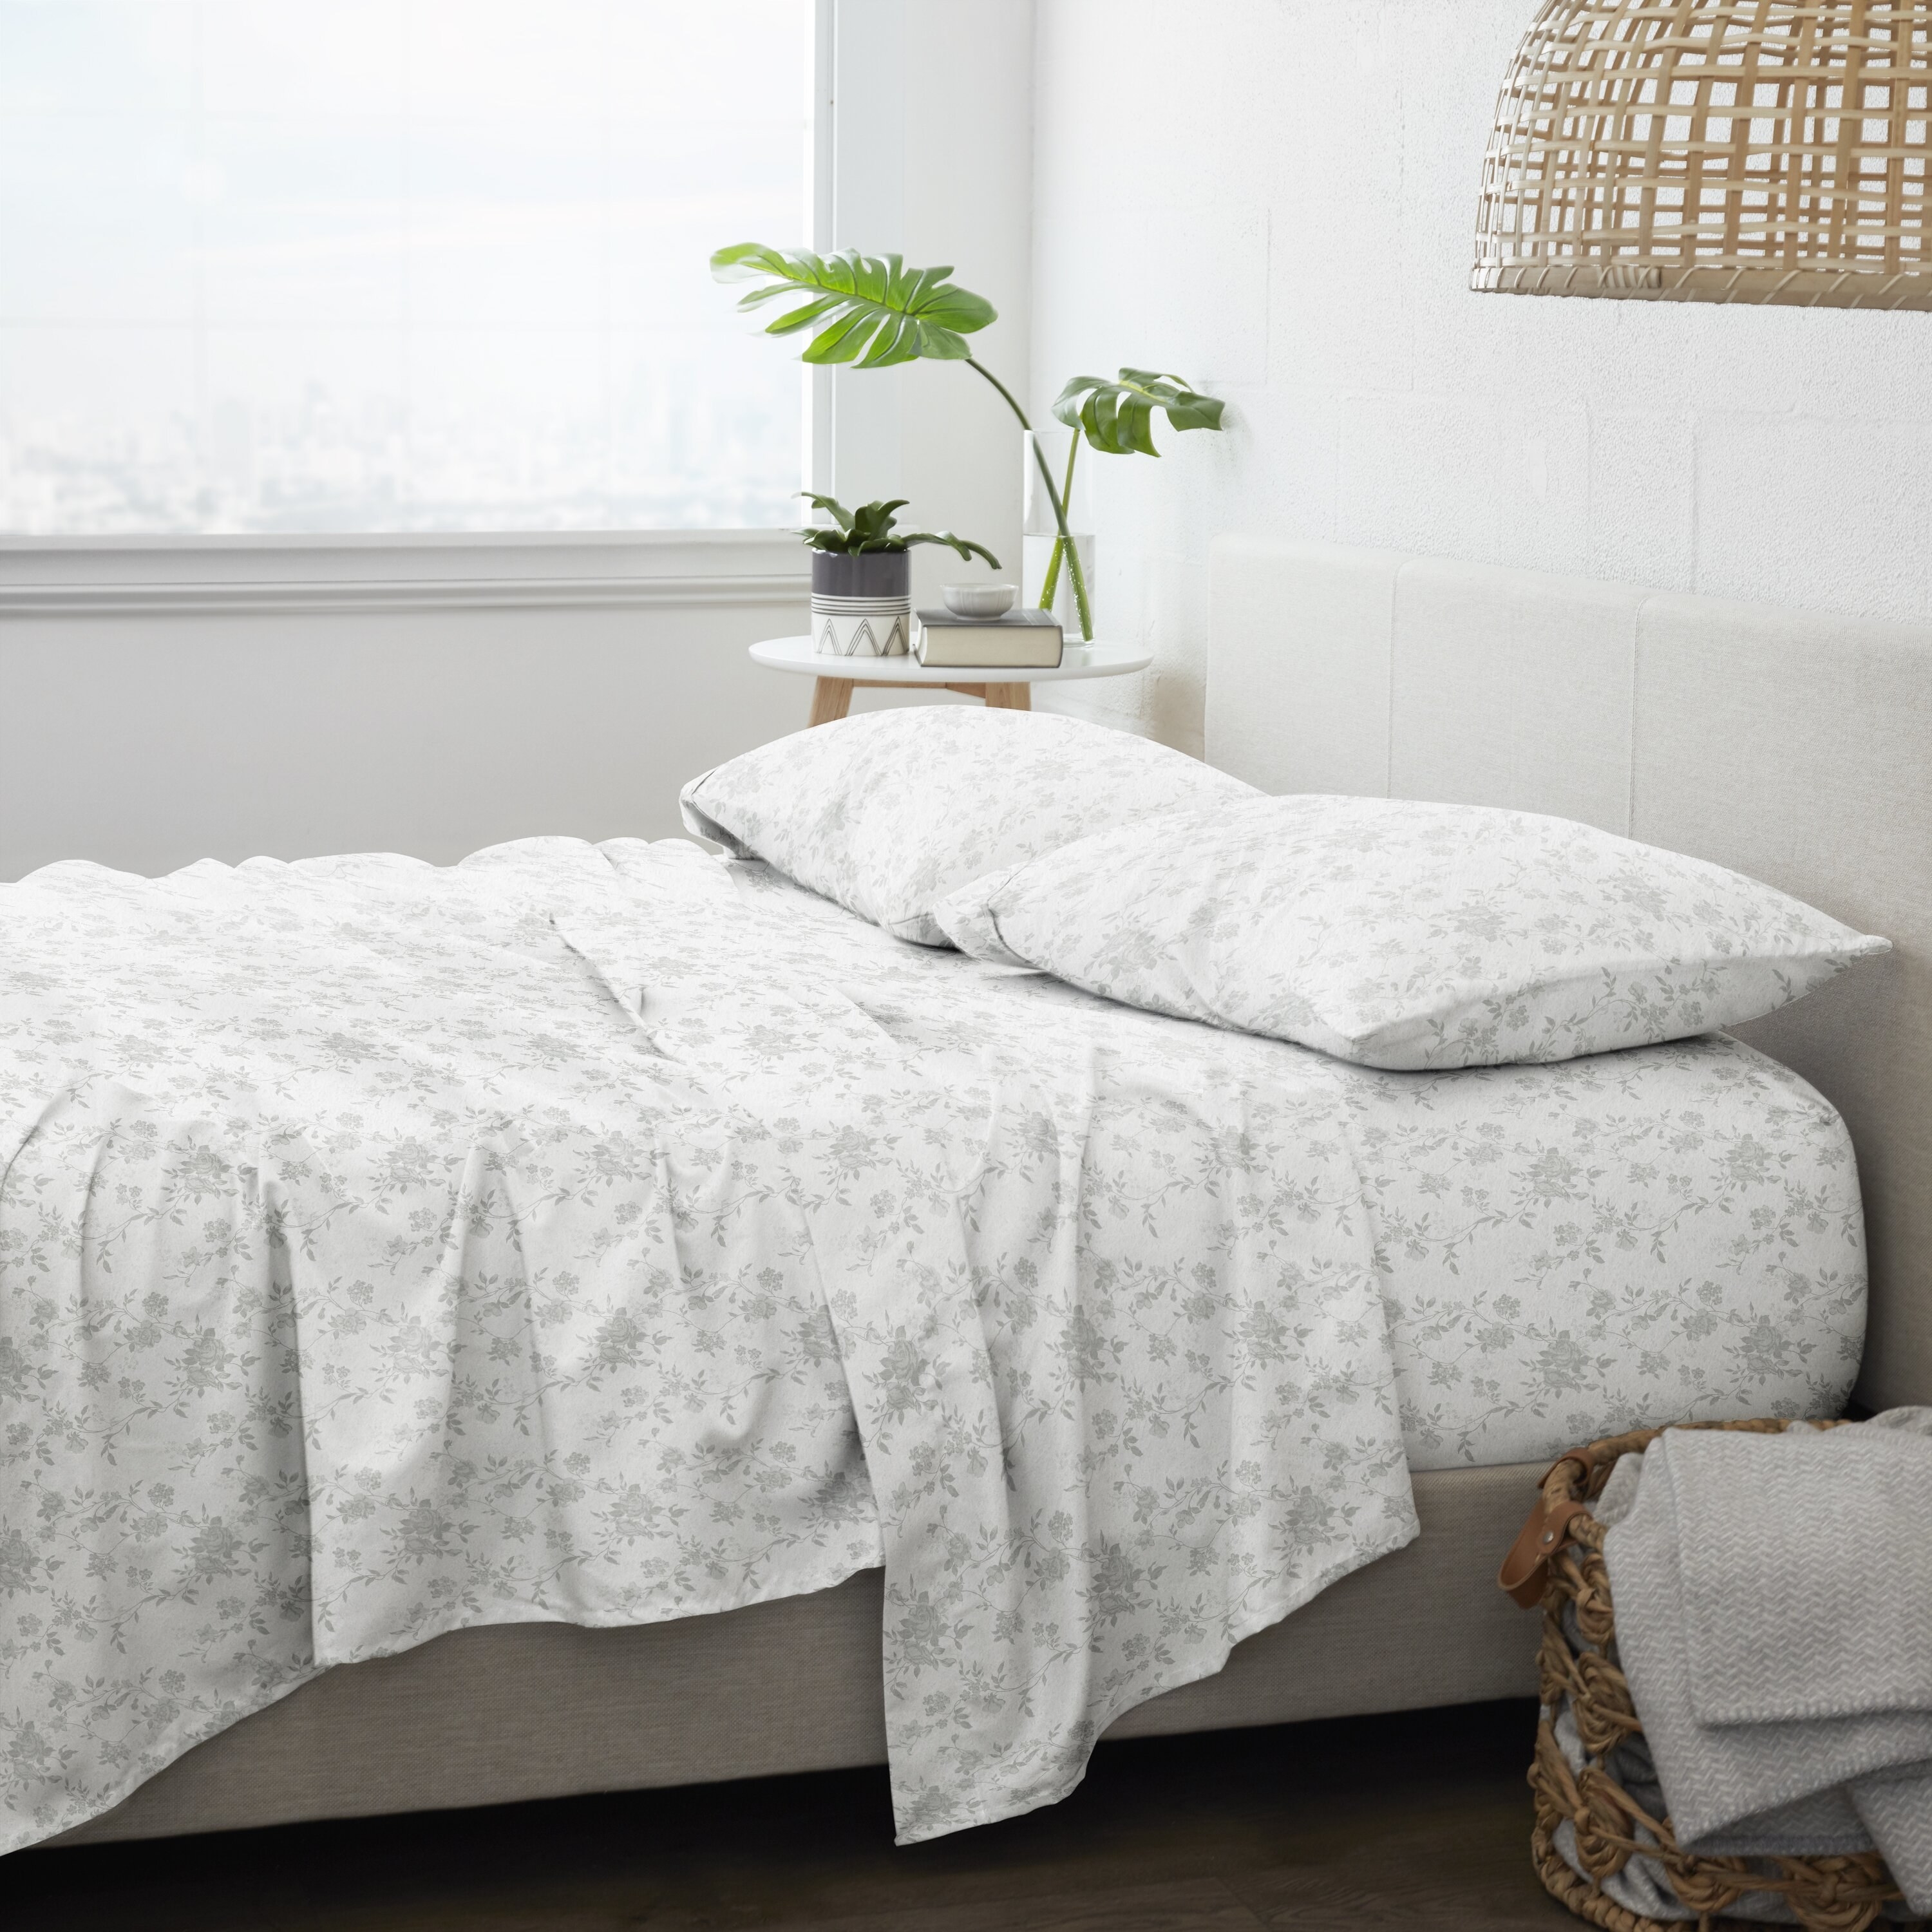 The white and light gray floral sheets on a bed